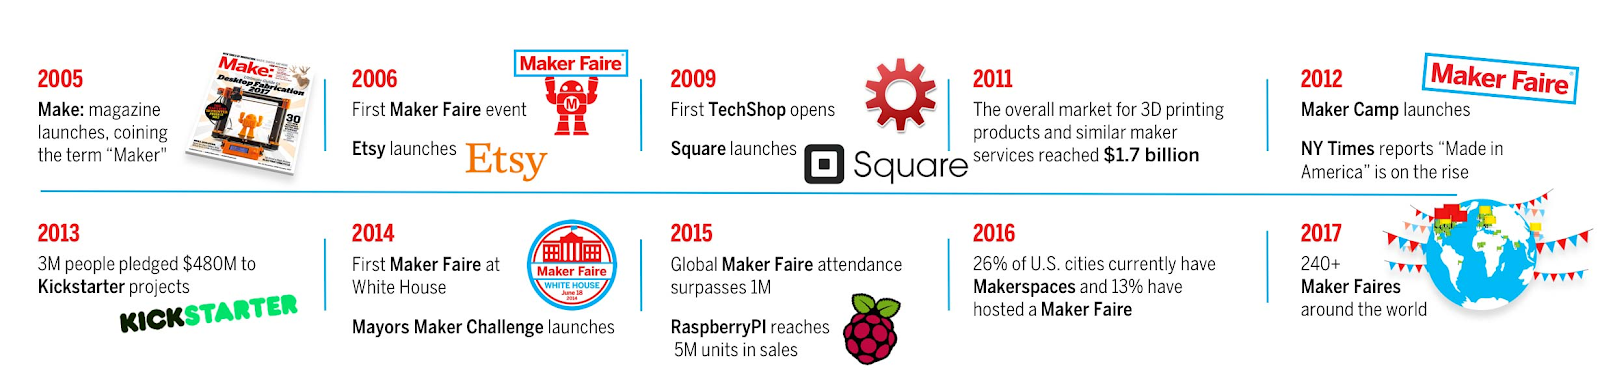 Timeline showing the growth of the Maker movement since 2005